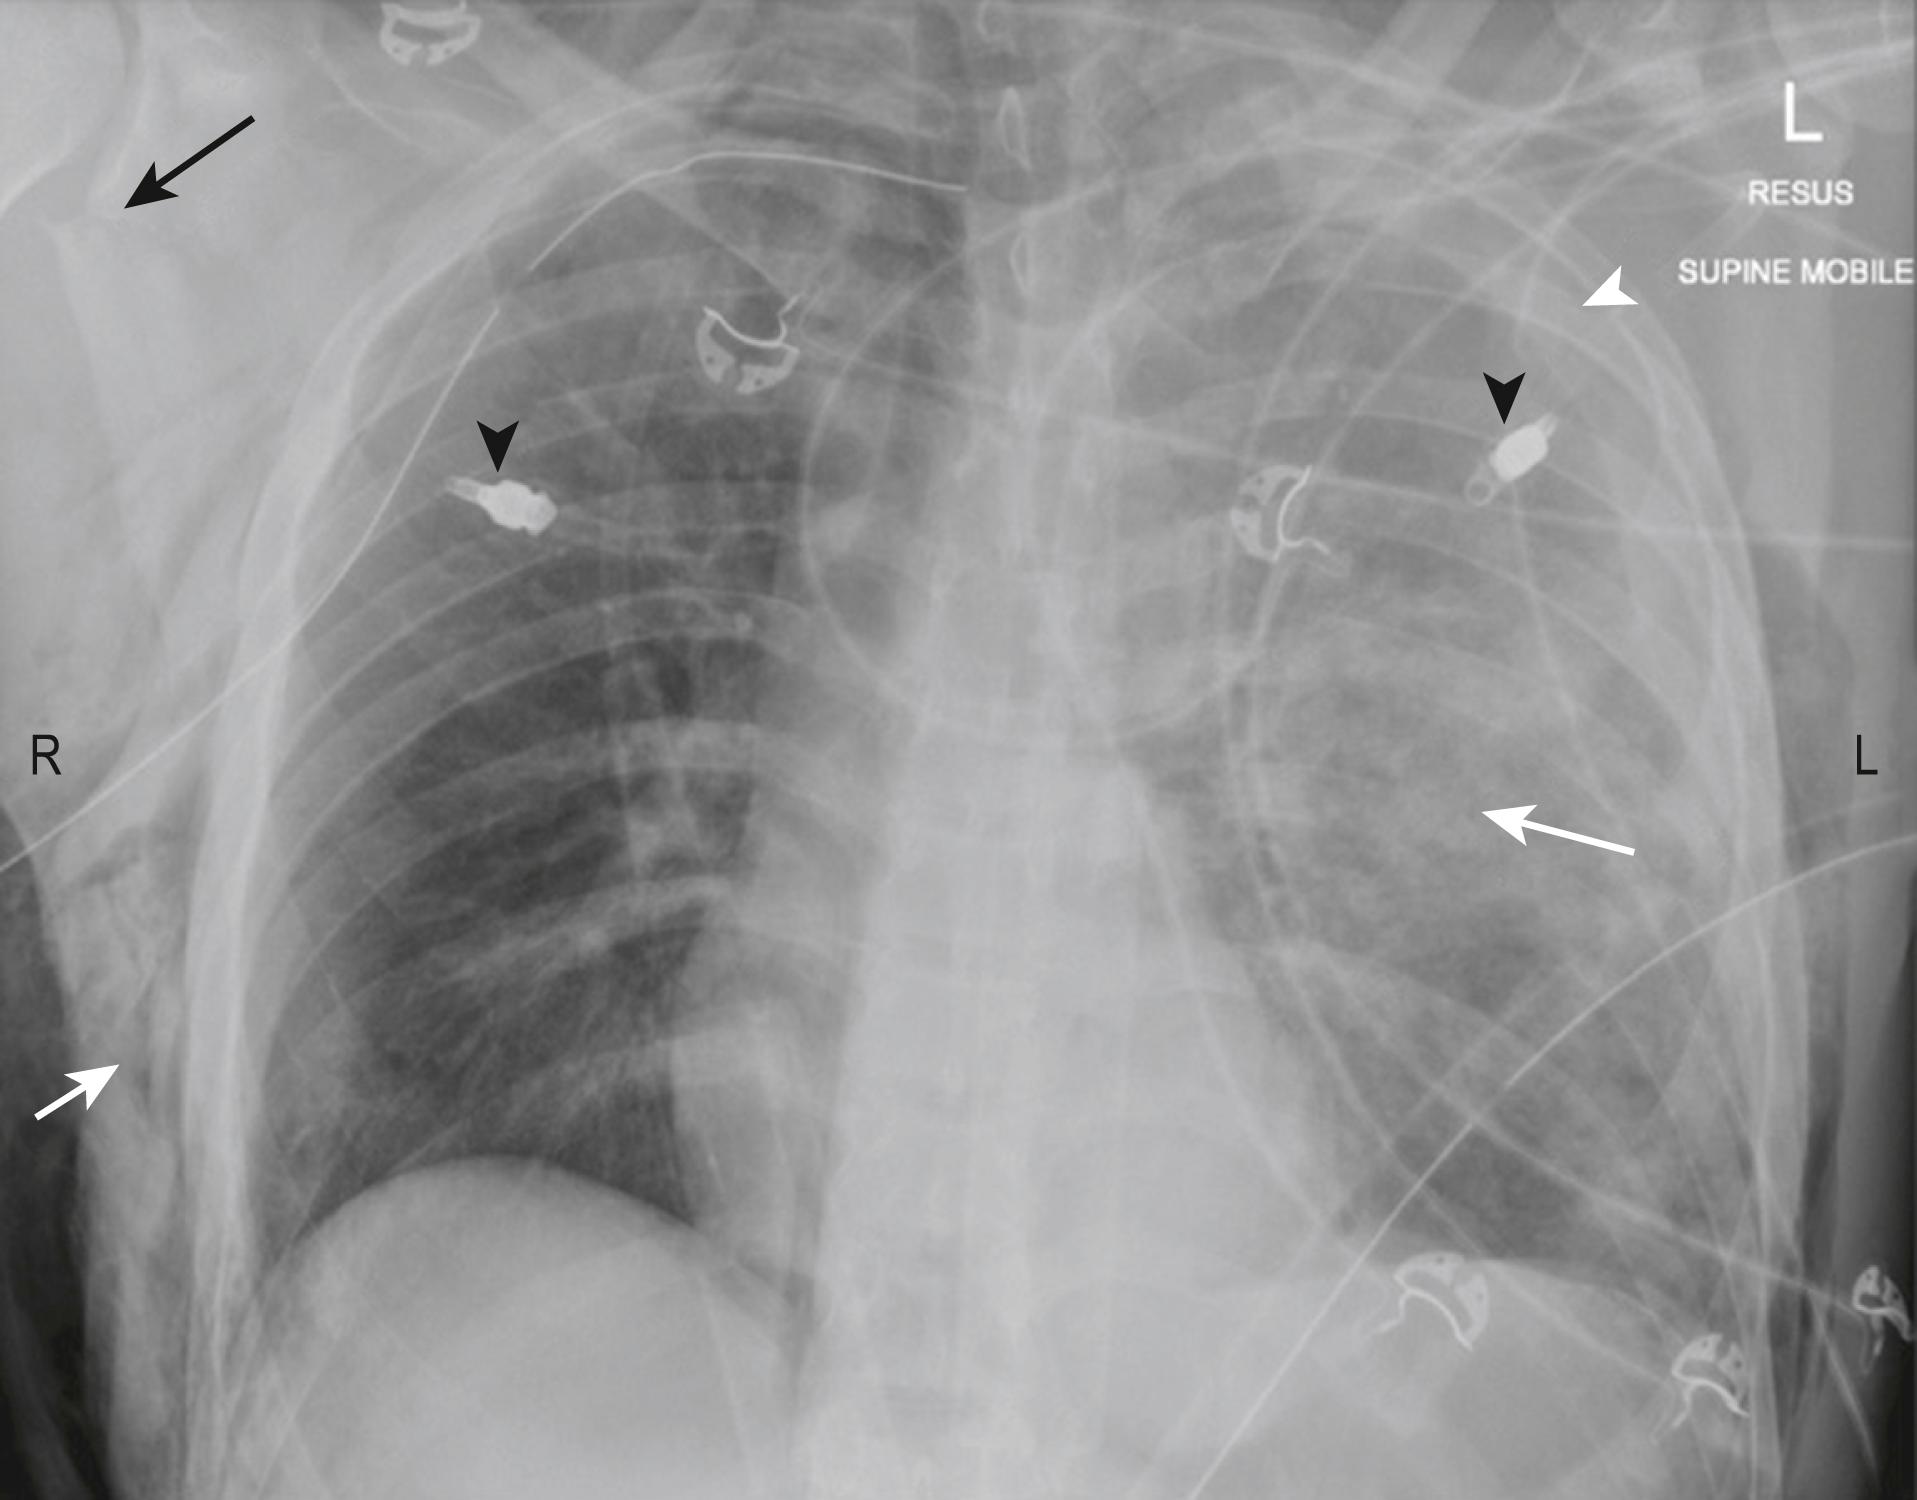 FIG. 3.8.3, Supine antero-posterior chest radiograph post-trauma showing multiple injuries: left-sided pulmonary contusion (long white arrow) and haemothorax (white arrowhead) ; right-sided pneumothorax treated with an intercostal catheter with surgical emphysema over the right lateral chest wall (short white arrow) ; right scapular fracture (black arrow) . Note bilateral catheters inserted by paramedics prior to arrival at the emergency department (black arrowheads) .